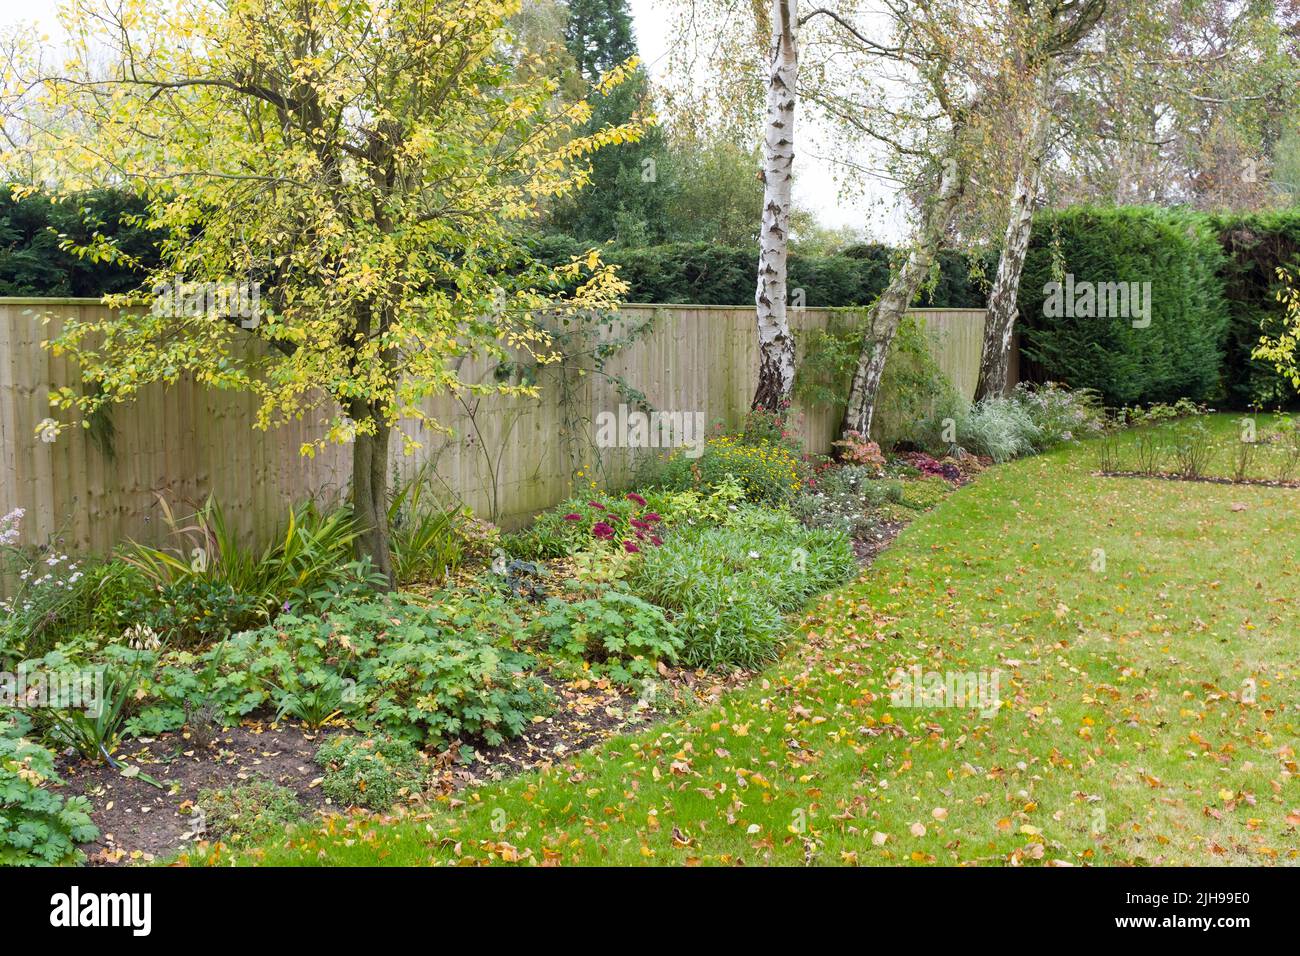 Garden flower bed (flowerbed) and lawn in autumn in a typical English garden, UK Stock Photo